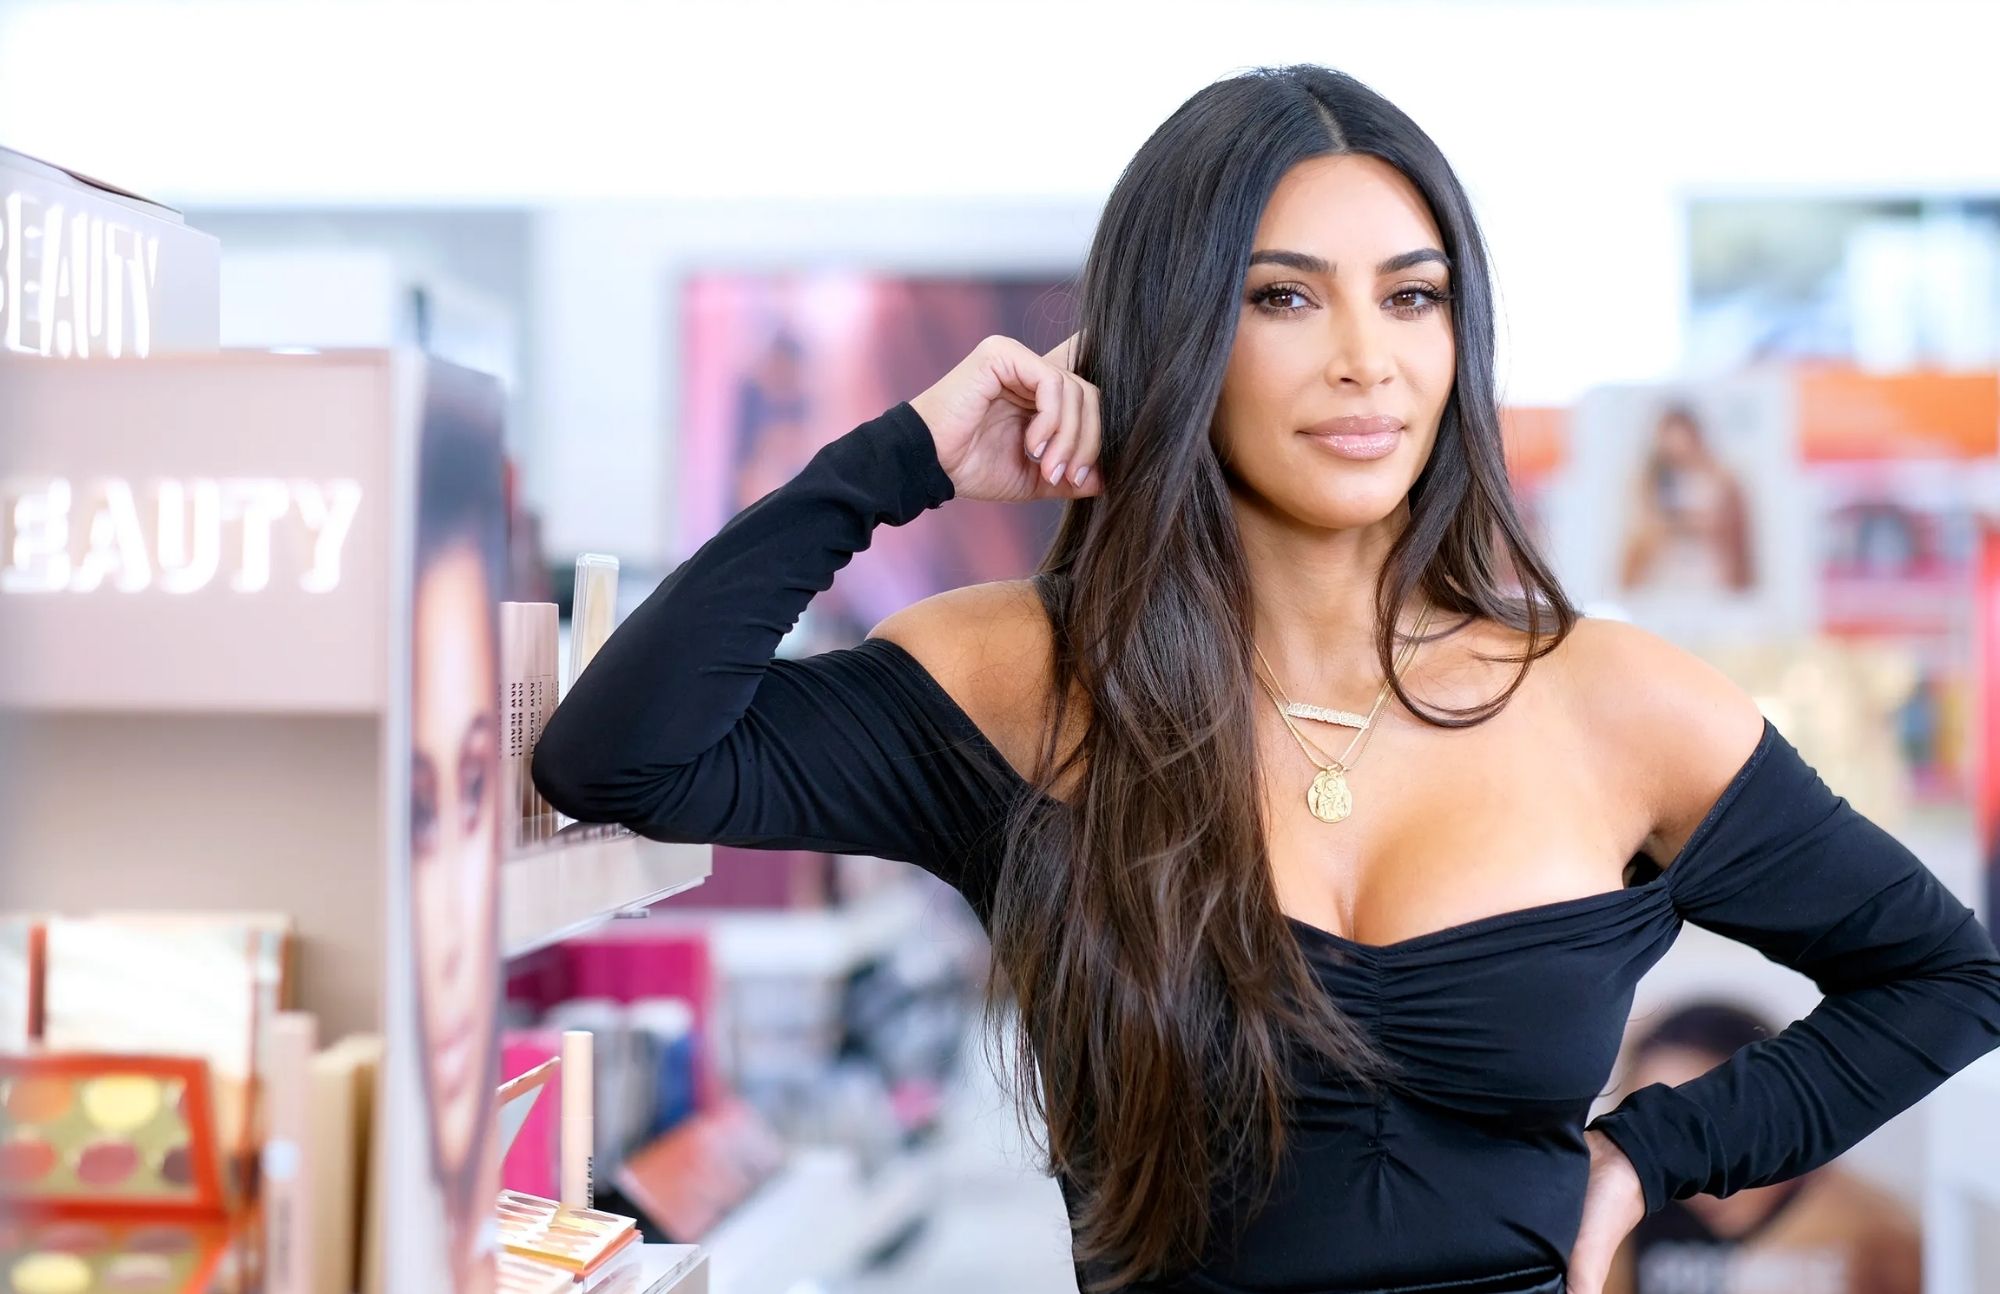 Kim Kardashian is wearing a black dress and leaning against the cosmetic sideboard inside the beauty shop